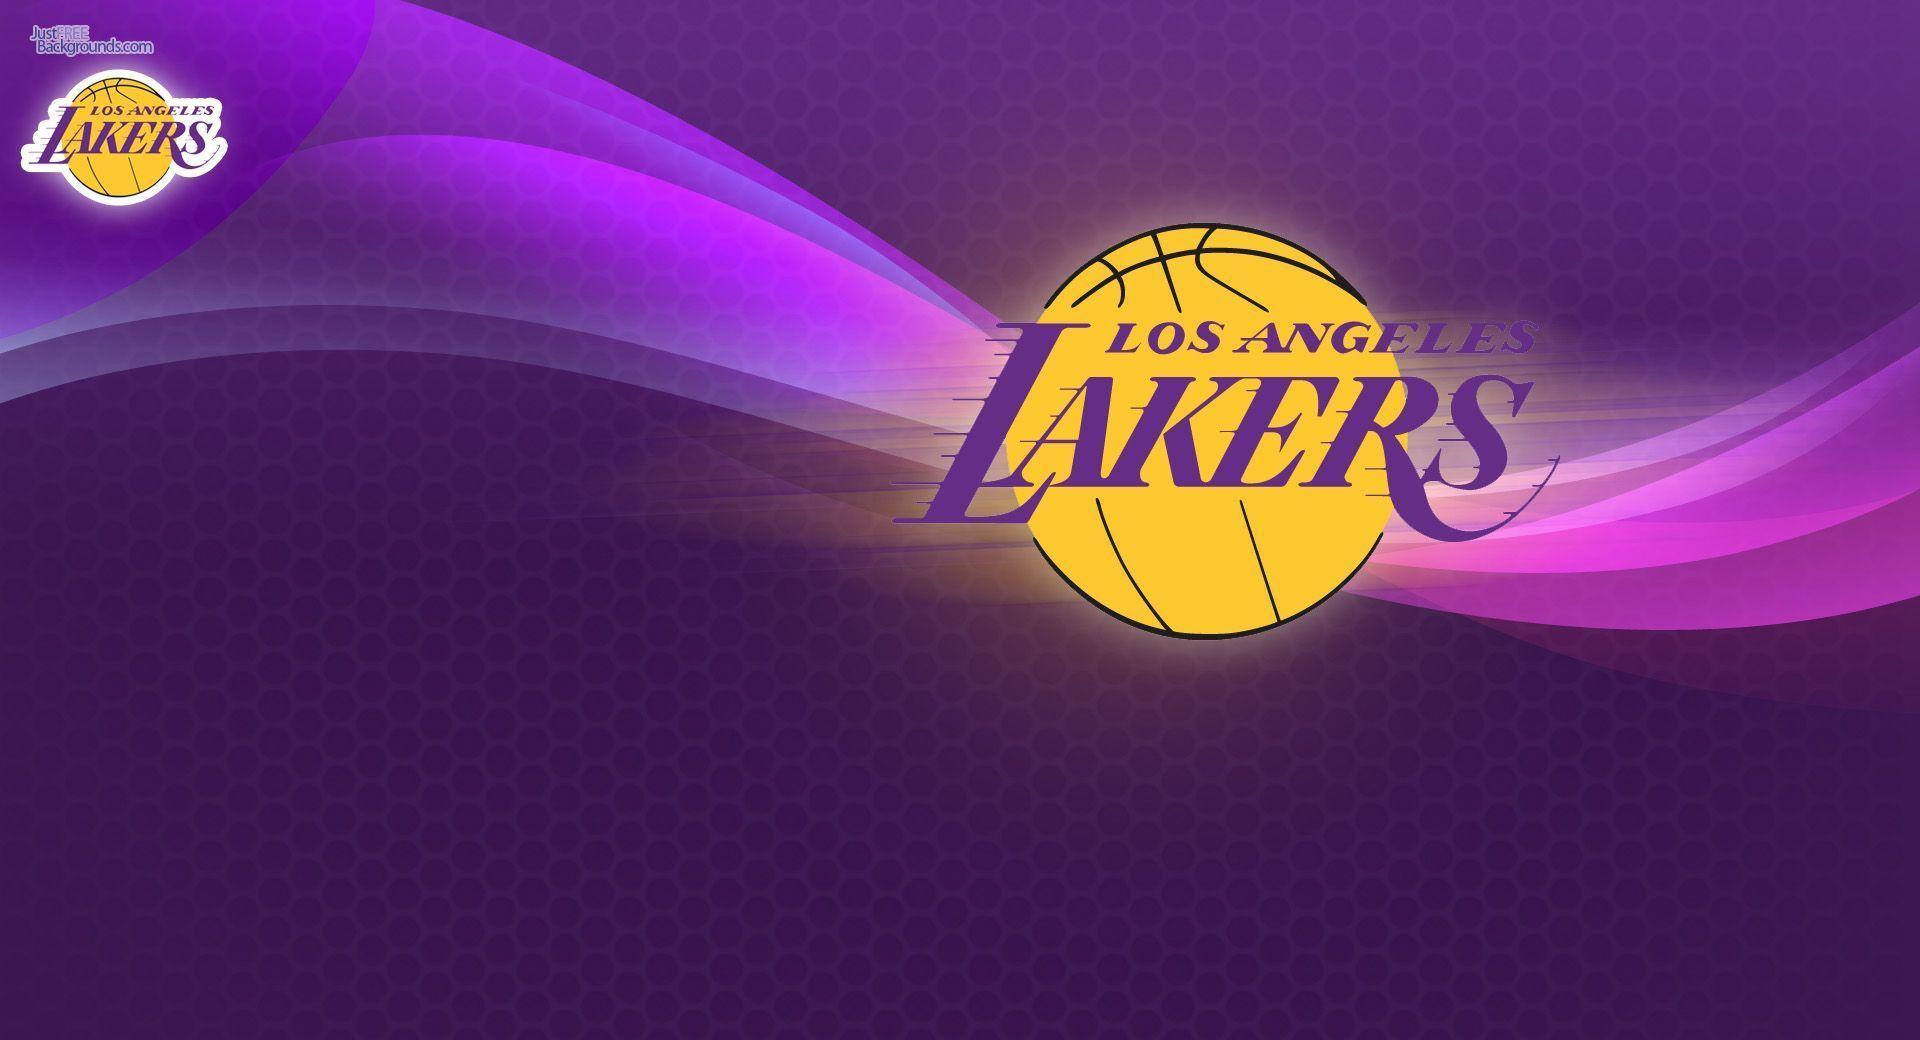 Enjoy this new Los Angeles Lakers desktop backgrounds